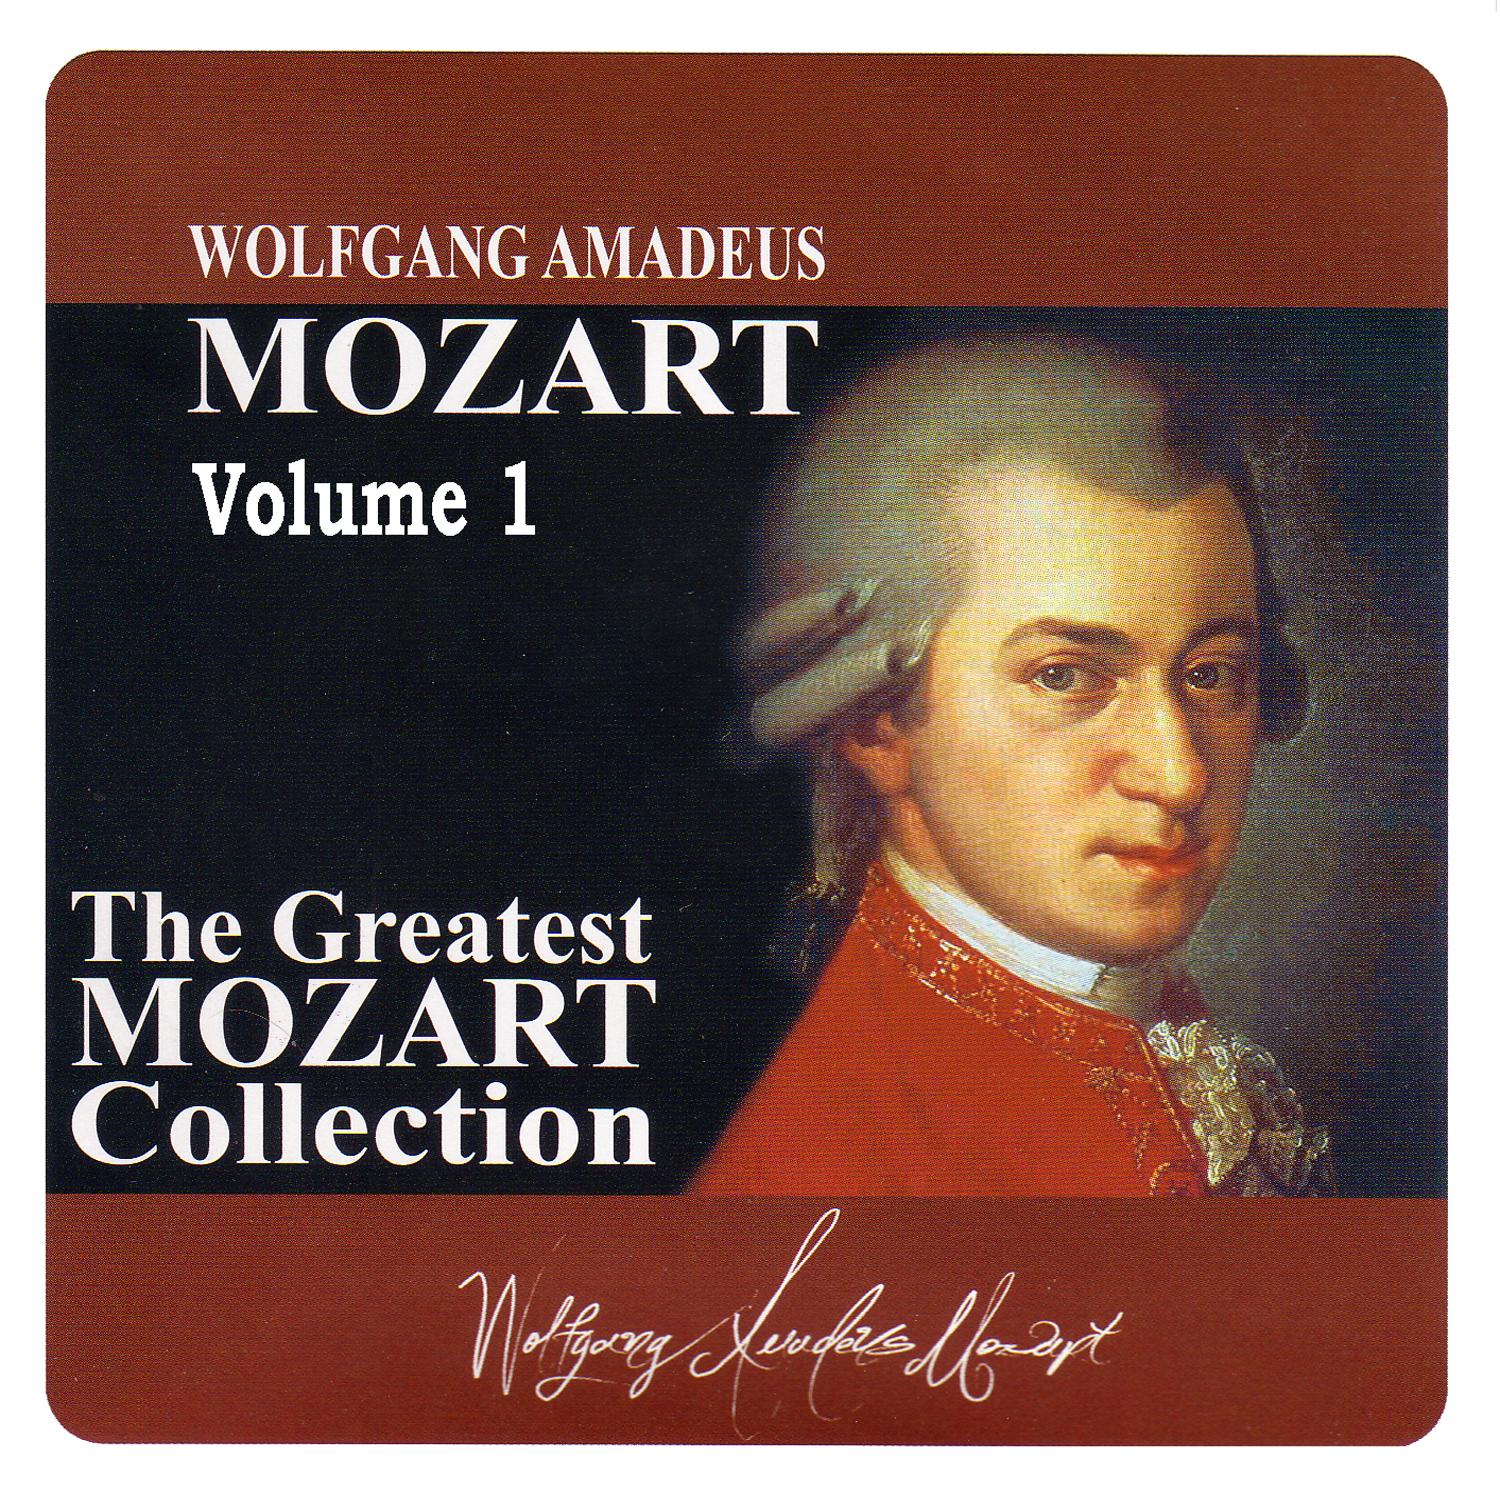 The Greatest Mozart Collection, Vol. 1